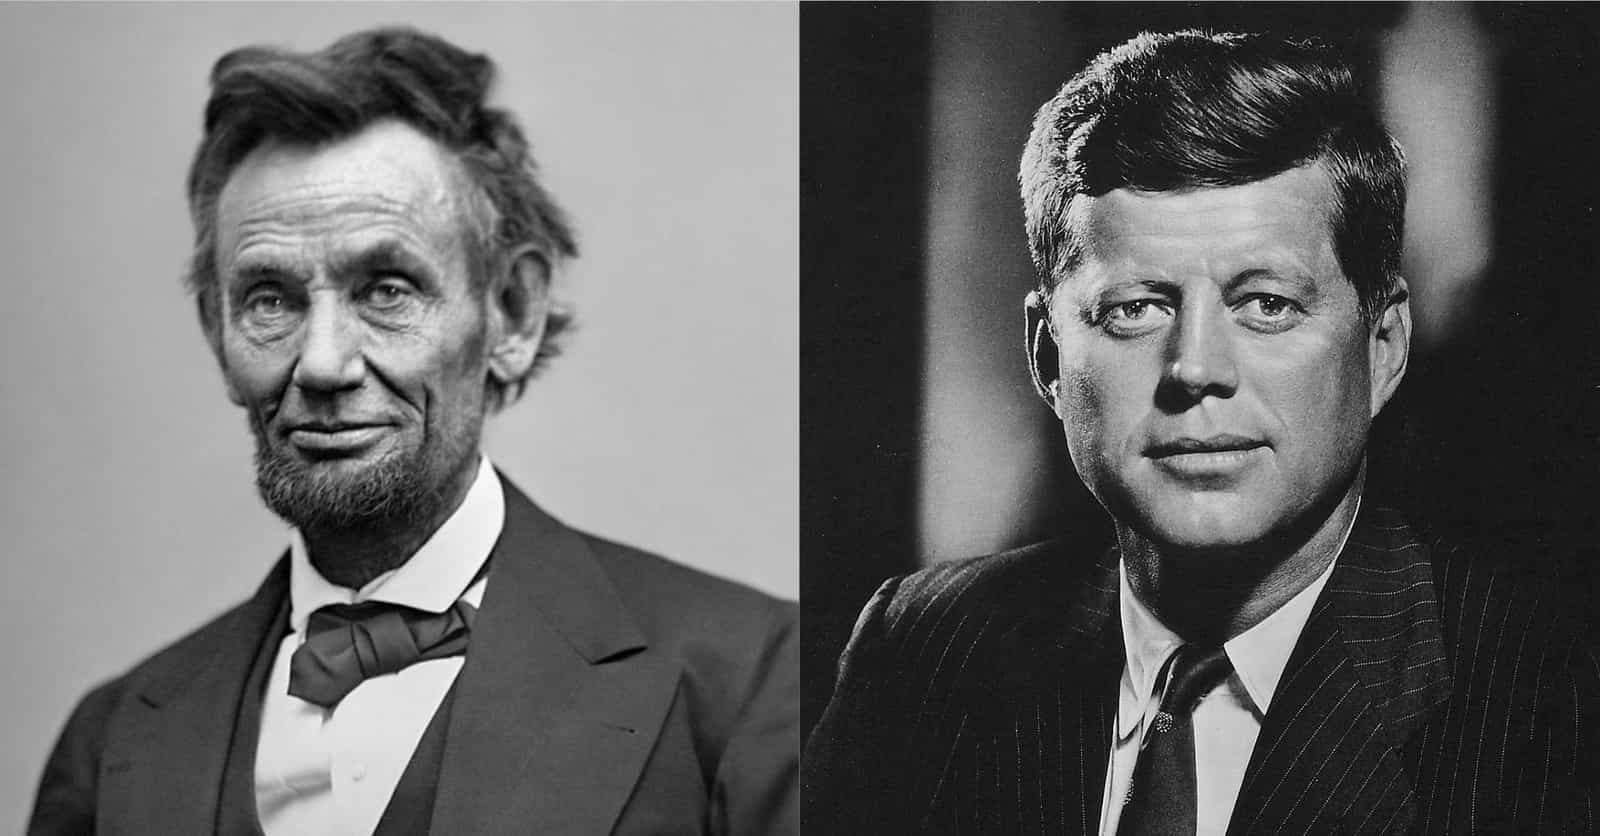 Why Does The Lincoln-Kennedy Urban Legend Persist Decades After It Was Disproved?